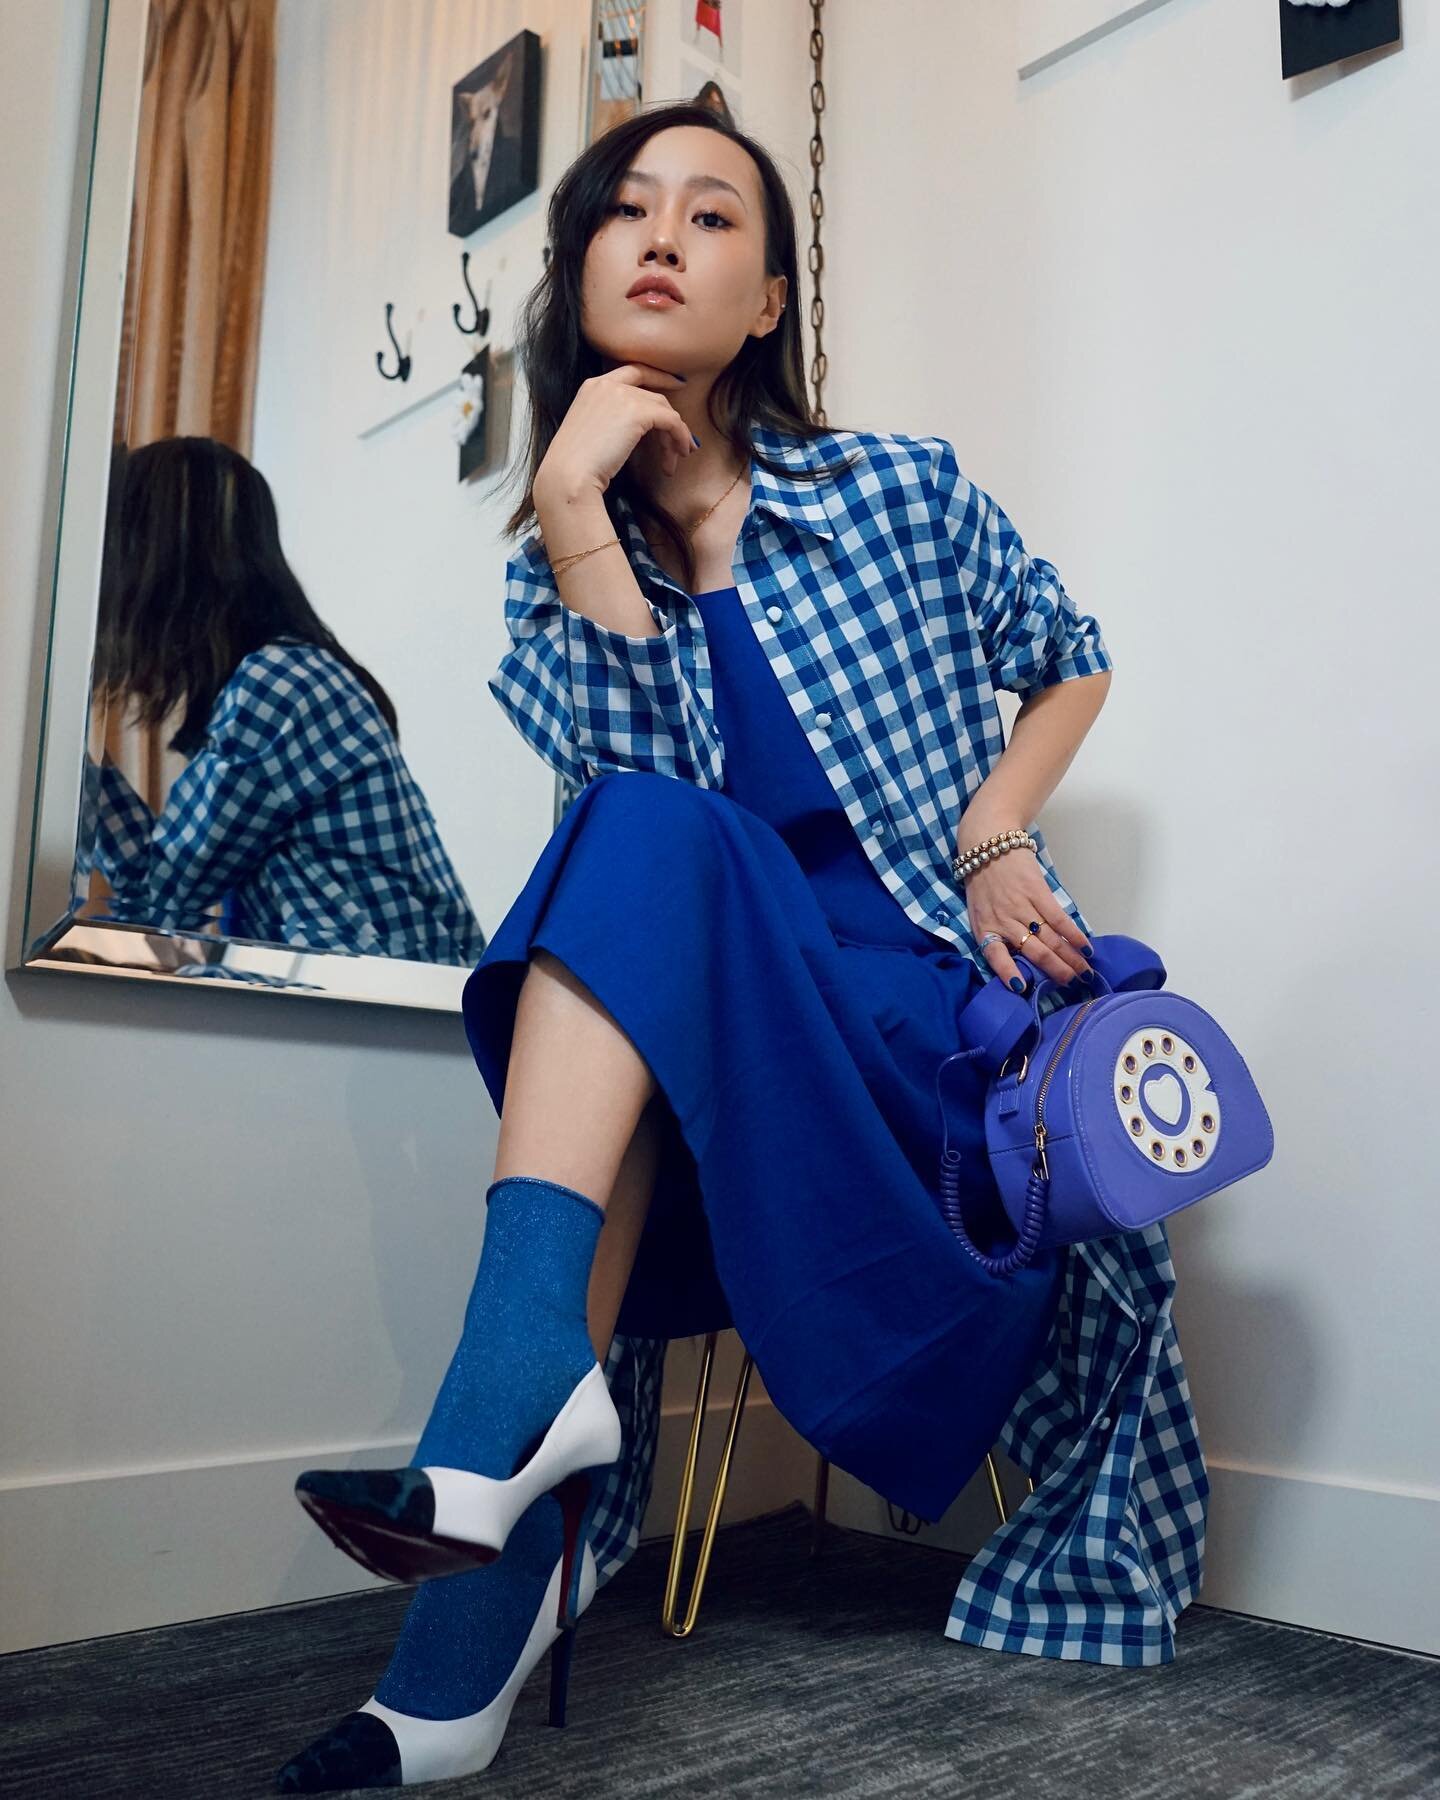 Bold in Blue 💙

Featuring our new elegant scoop neck dress, designed to pair perfectly with our gingham shirt dress or wear on its own. Shown with Stitched Leather heels that elevate the look. Shot by @franciationphotography for @officialvesselmag.
